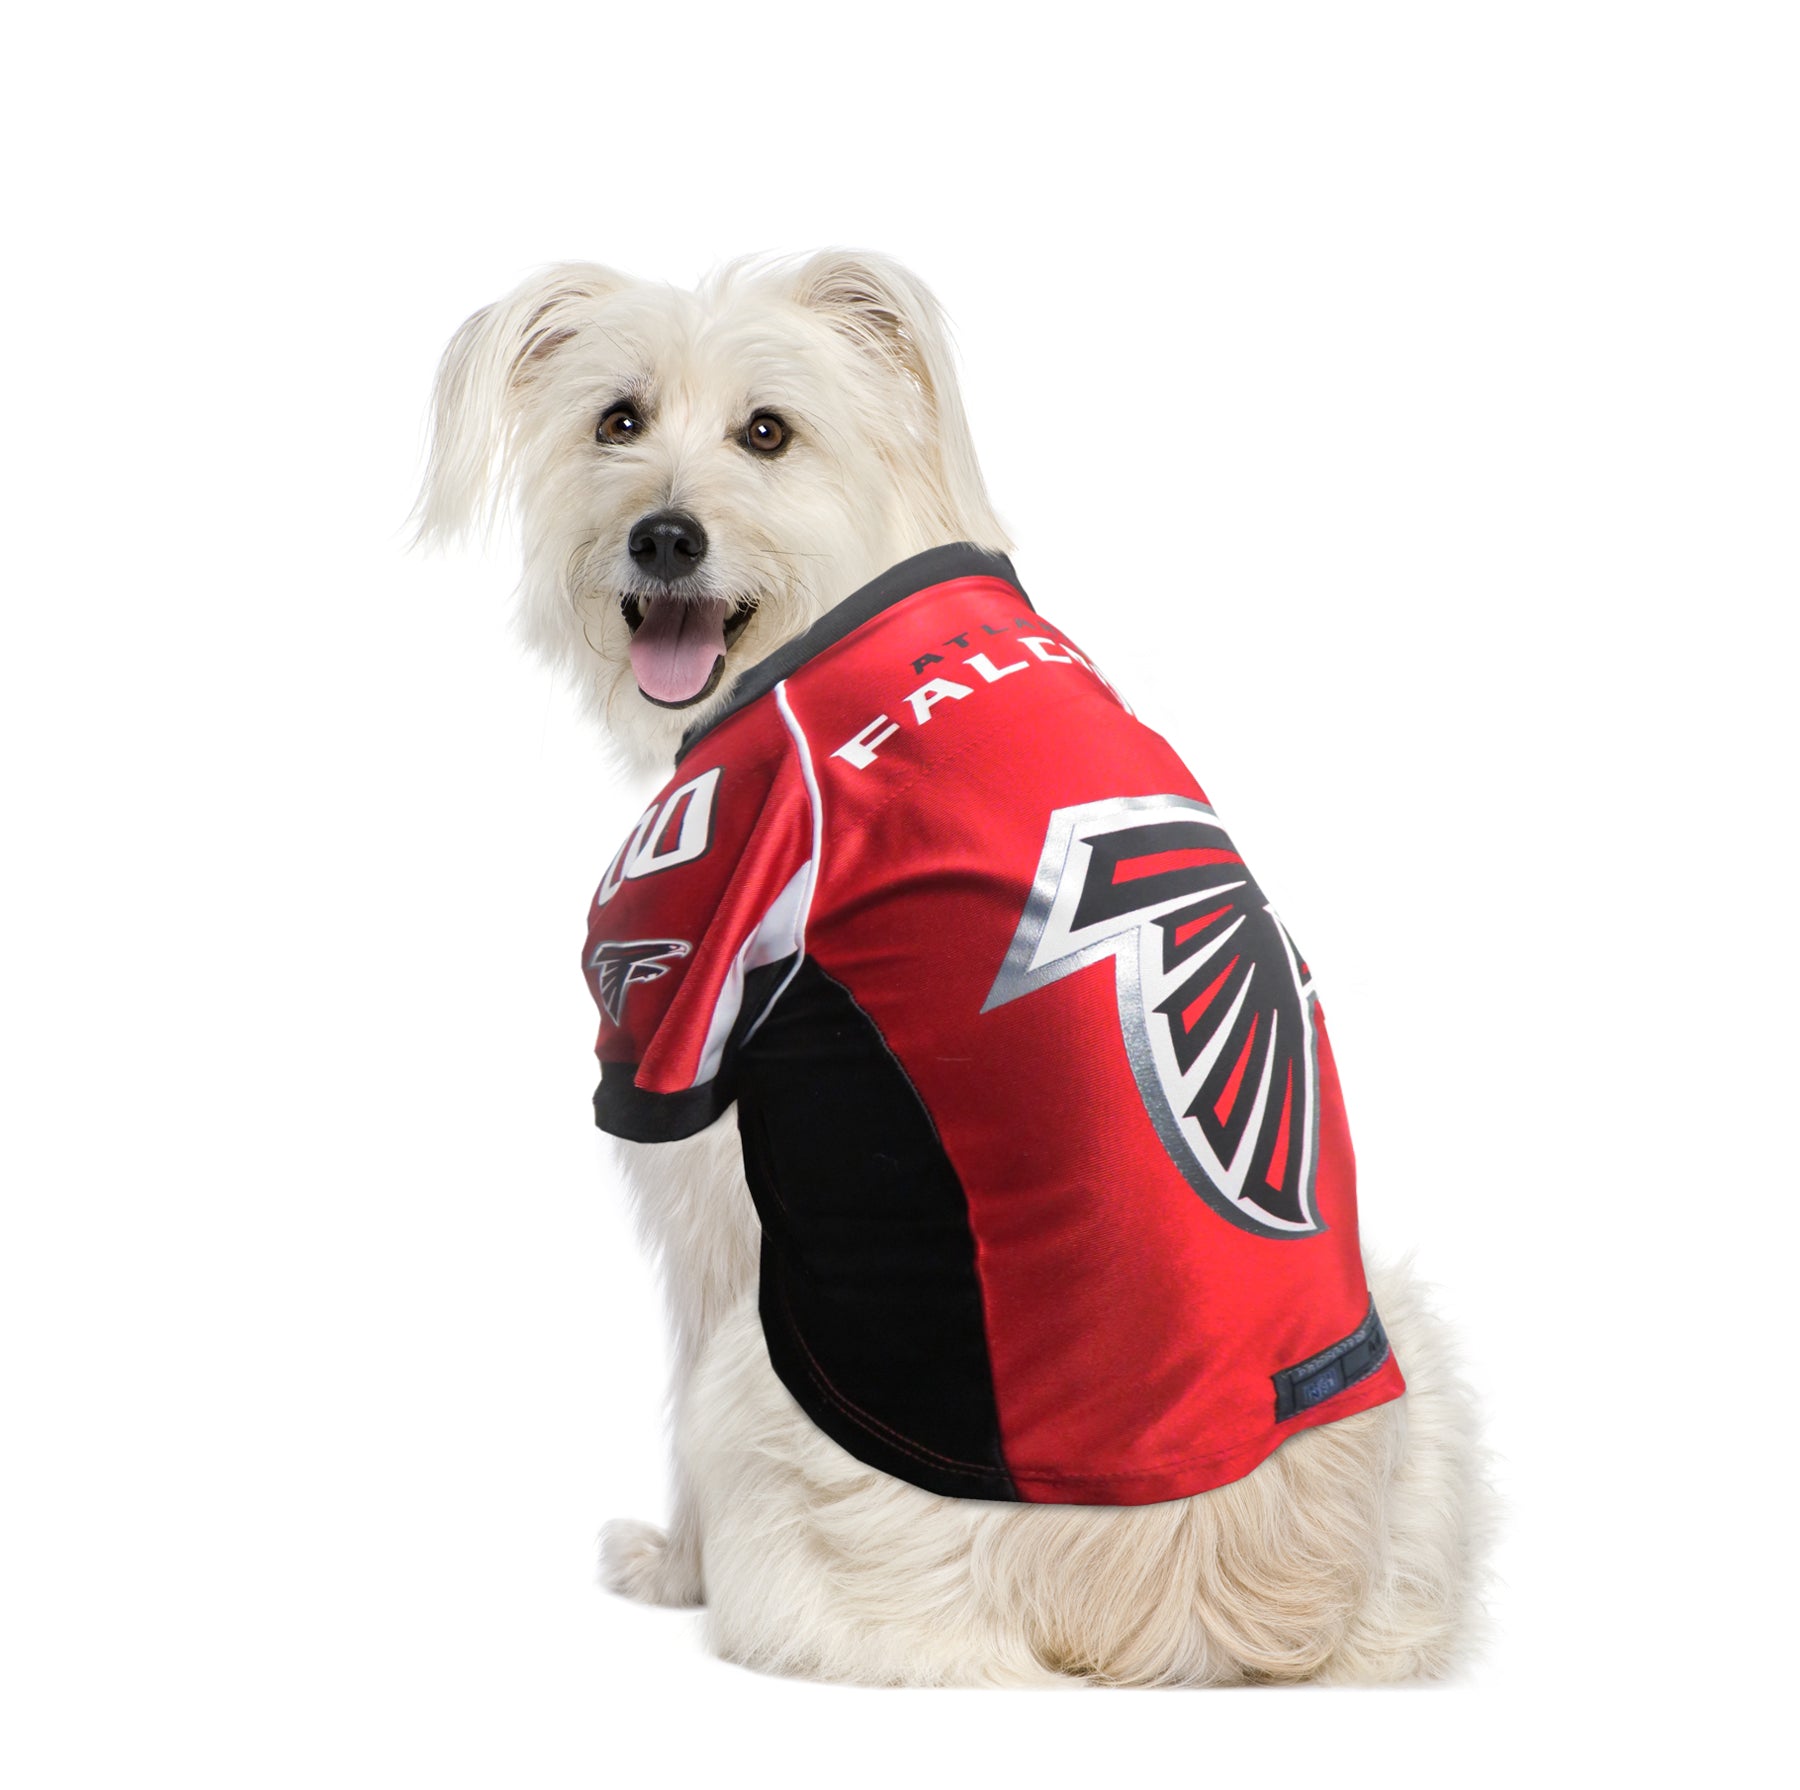  NFL Atlanta Falcons Dog Jersey, Size: X-Large. Best Football  Jersey Costume for Dogs & Cats. Licensed Jersey Shirt. : Sports & Outdoors